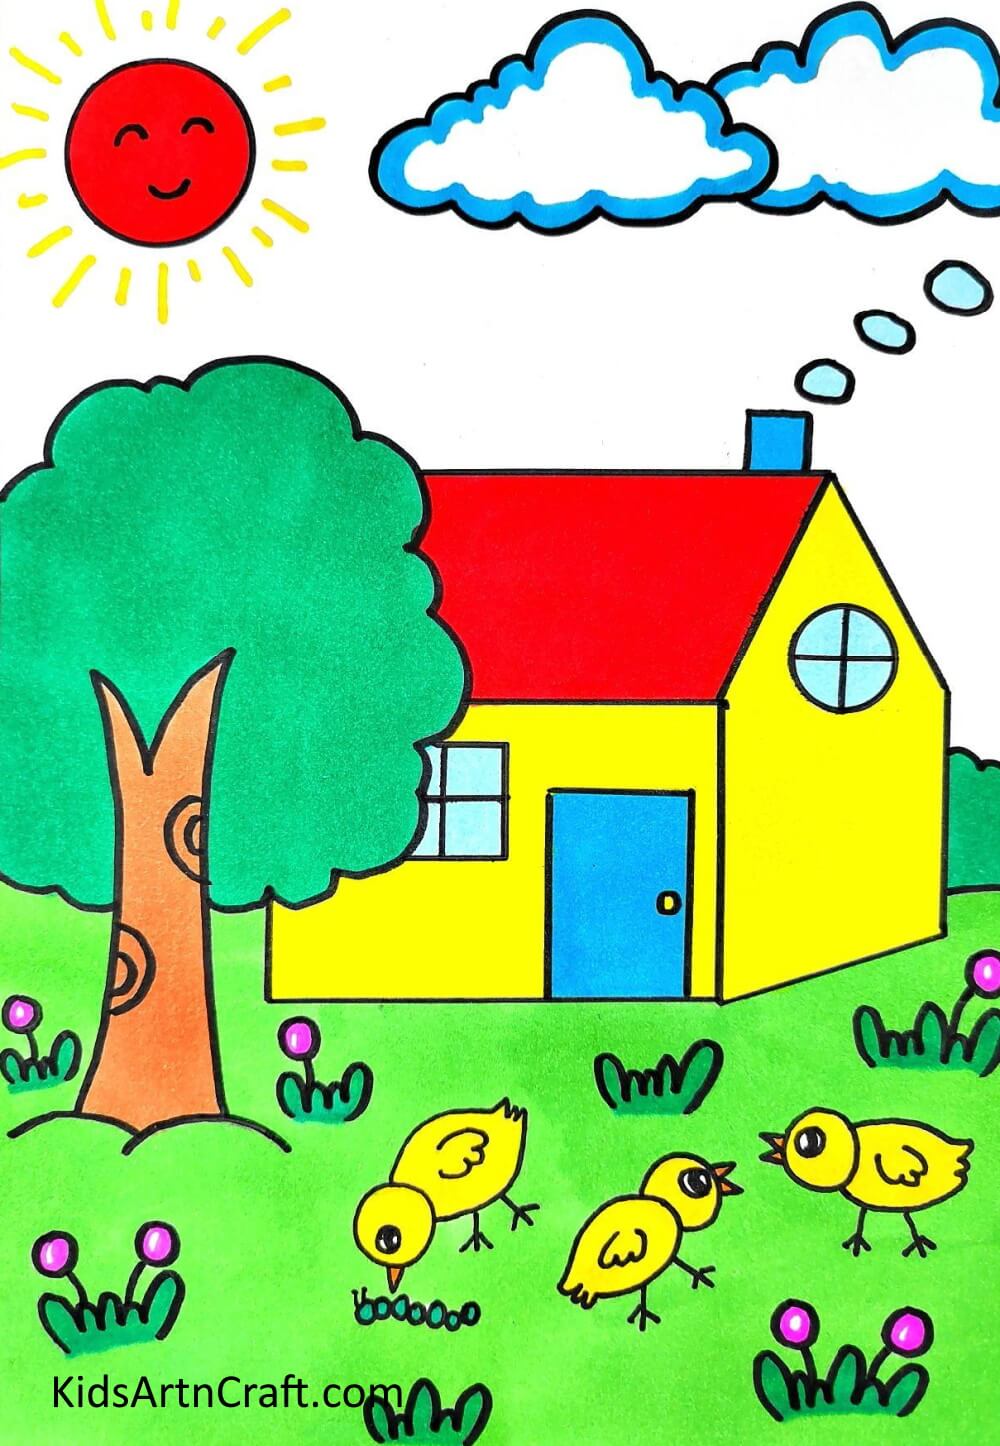 Coloring The Drawing Creating a house, tree, and landscape illustration step by step